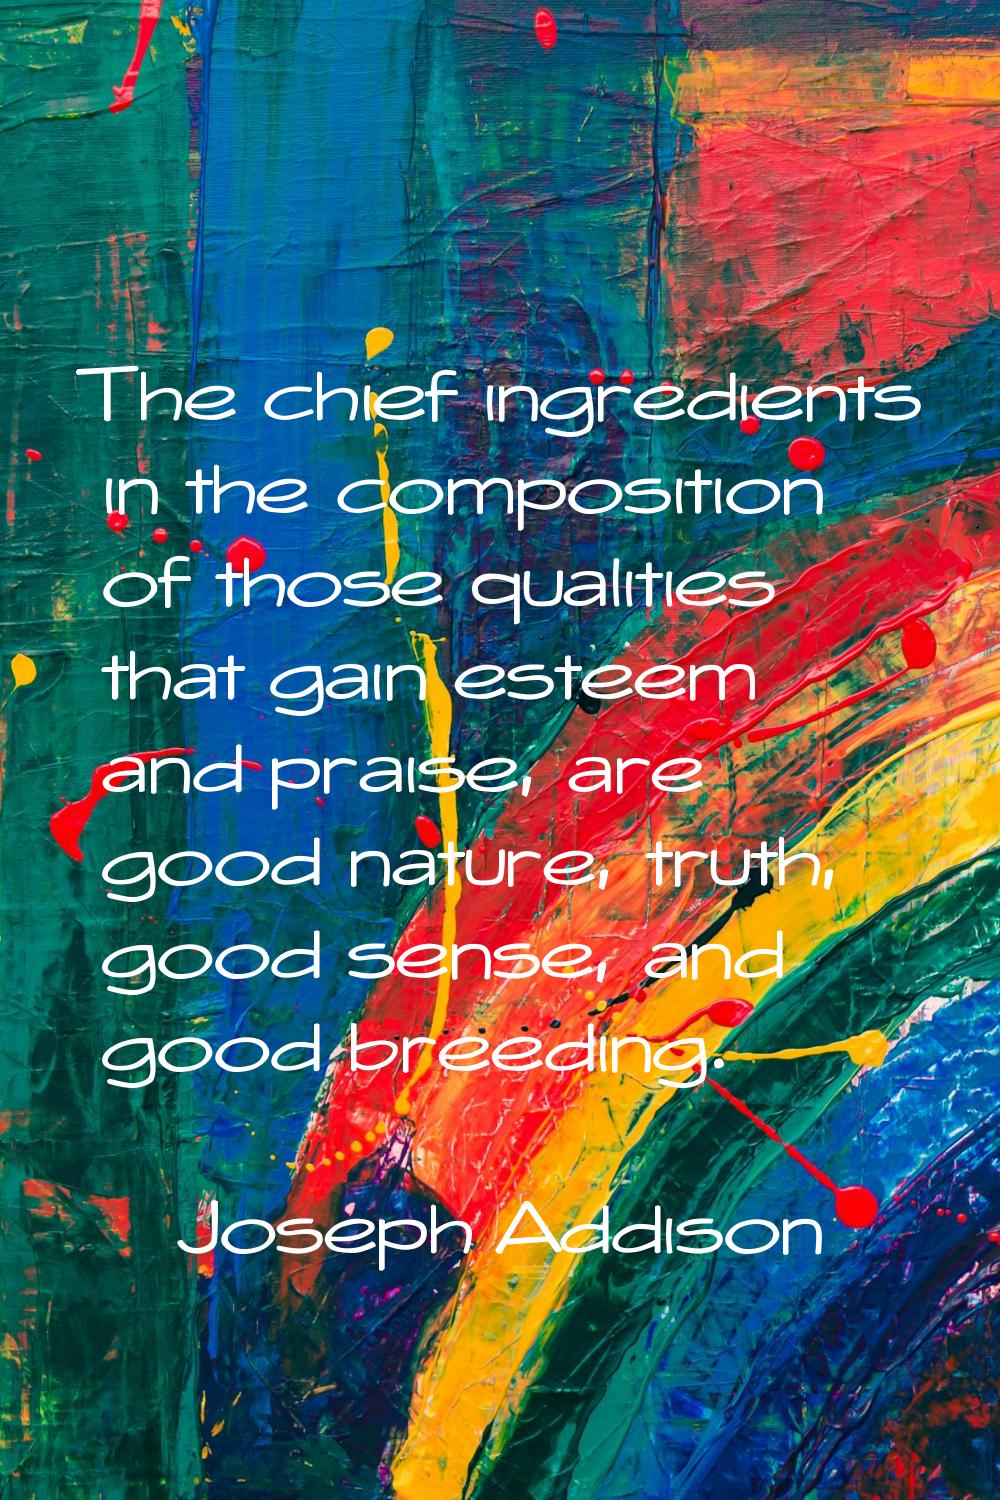 The chief ingredients in the composition of those qualities that gain esteem and praise, are good n